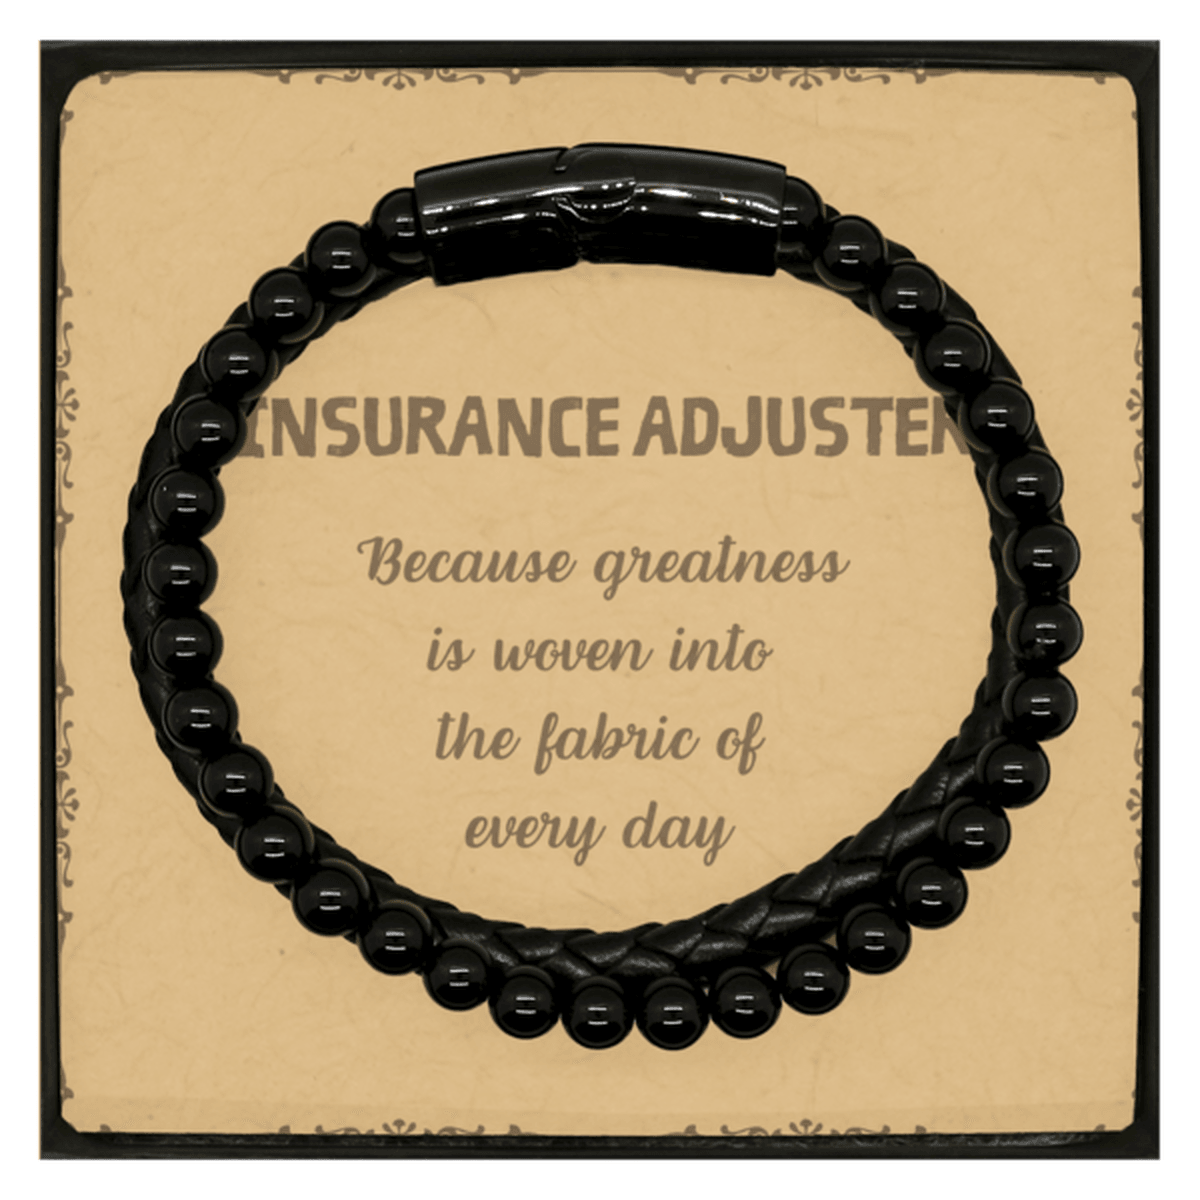 Sarcastic Insurance Adjuster Stone Leather Bracelets Gifts, Christmas Holiday Gifts for Insurance Adjuster Birthday Message Card, Insurance Adjuster: Because greatness is woven into the fabric of every day, Coworkers, Friends - Mallard Moon Gift Shop